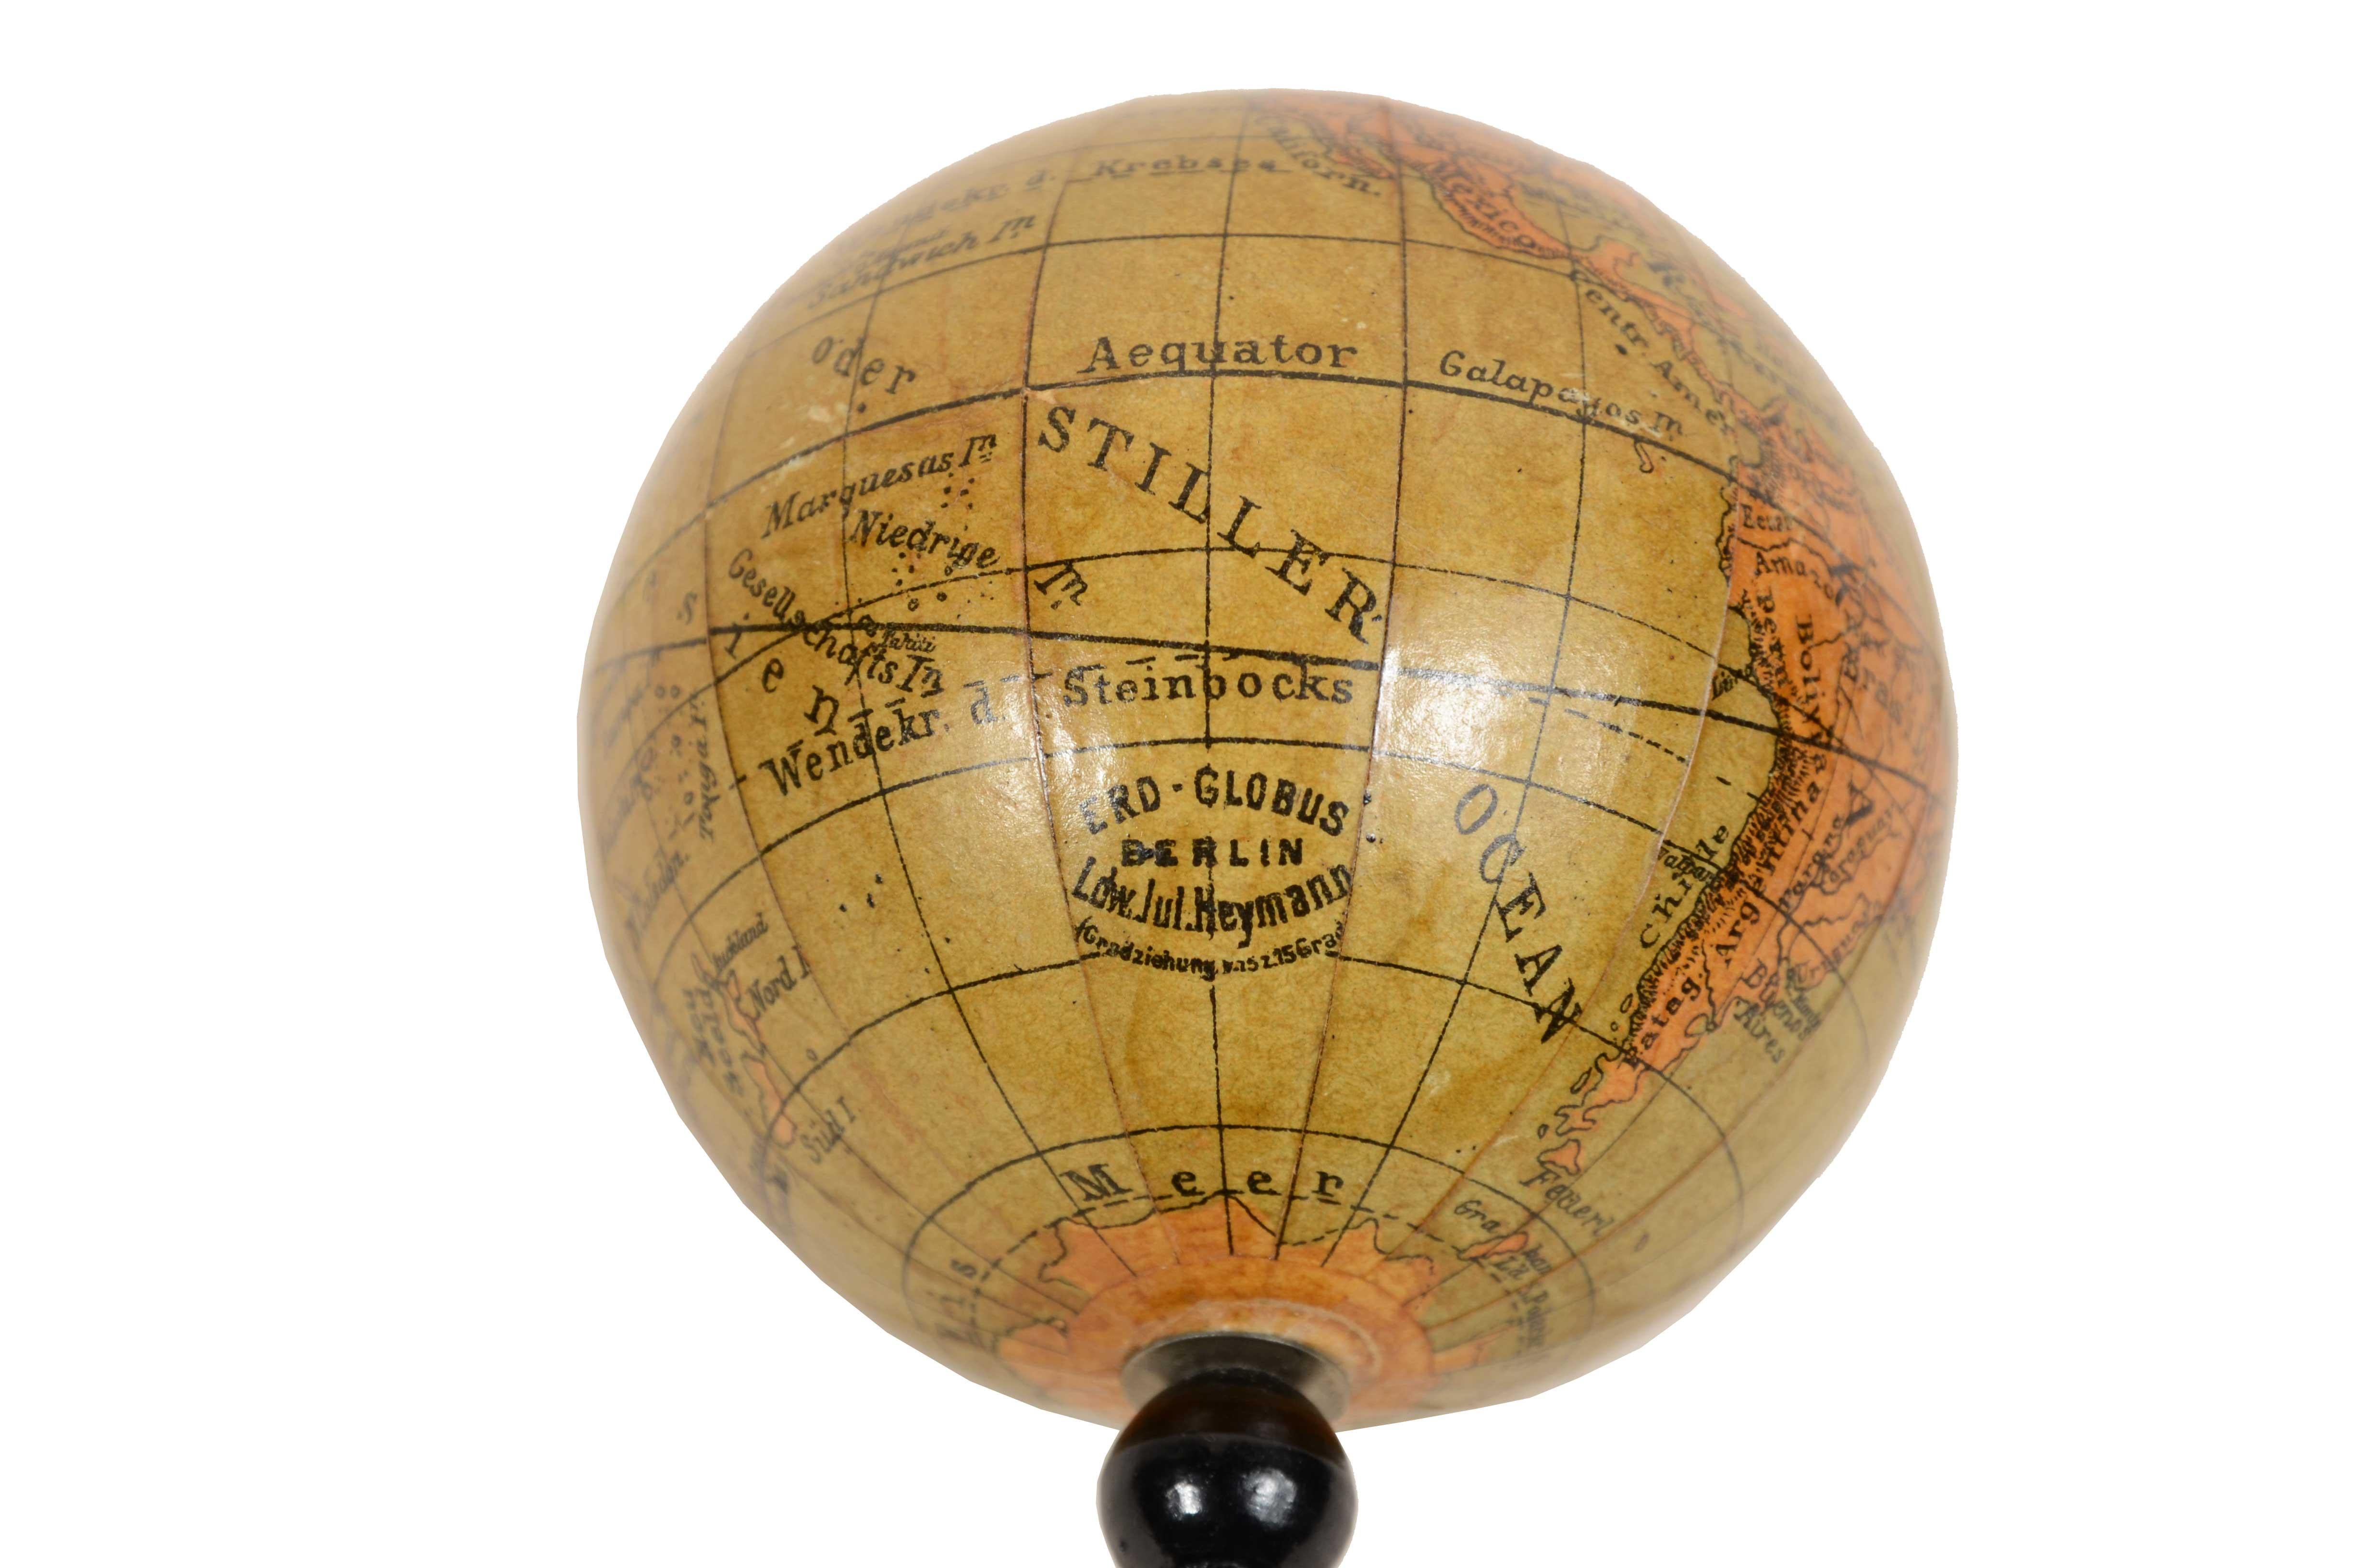 Small globe published in the second half of the 19th century by cartographer Ludw. Jul. Heymann. Papier maché ball and turned and ebonized wood base. 
Height cm 16,- inches 6.5, sphere diameter cm 7 - inches 2.8. 
Good state of preservation.